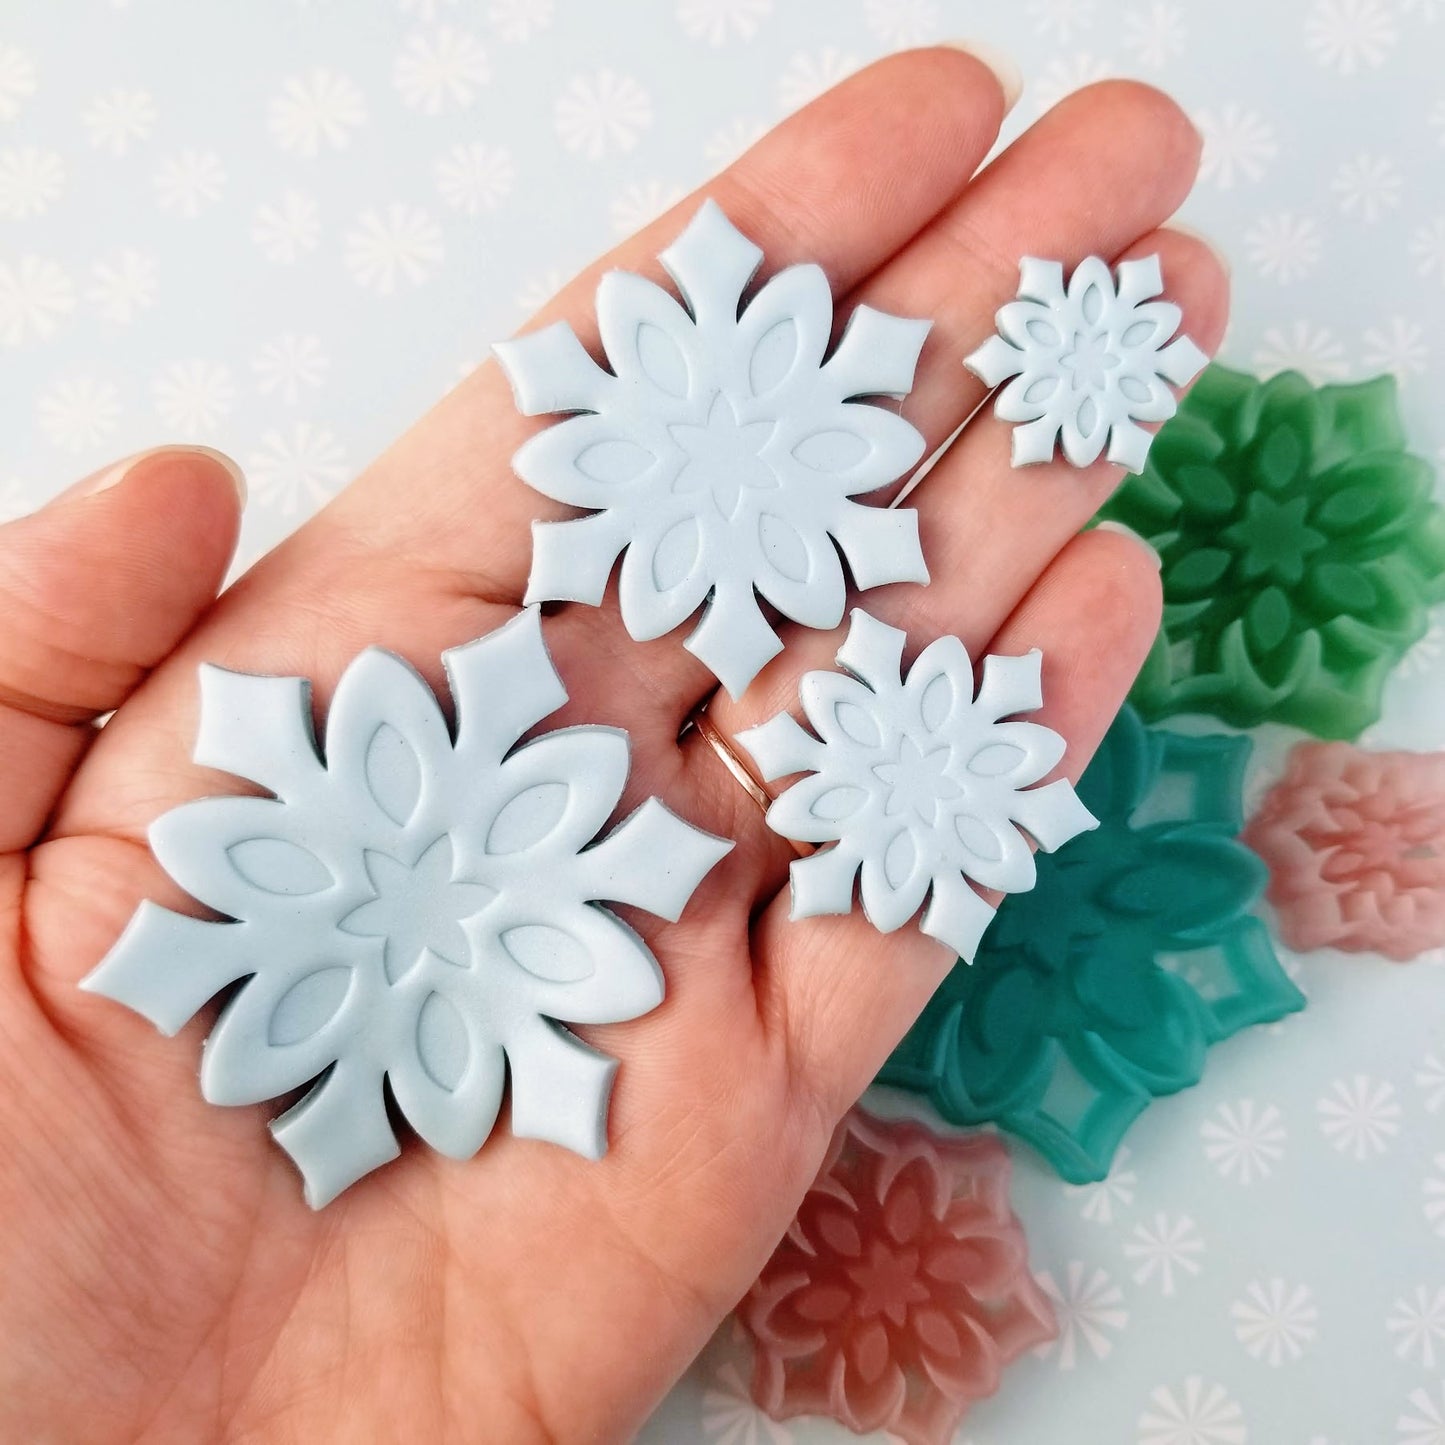 Winter Christmas Snowflakes Polymer Clay Earrings Jewelry Pendant Charm Ornament Crafts